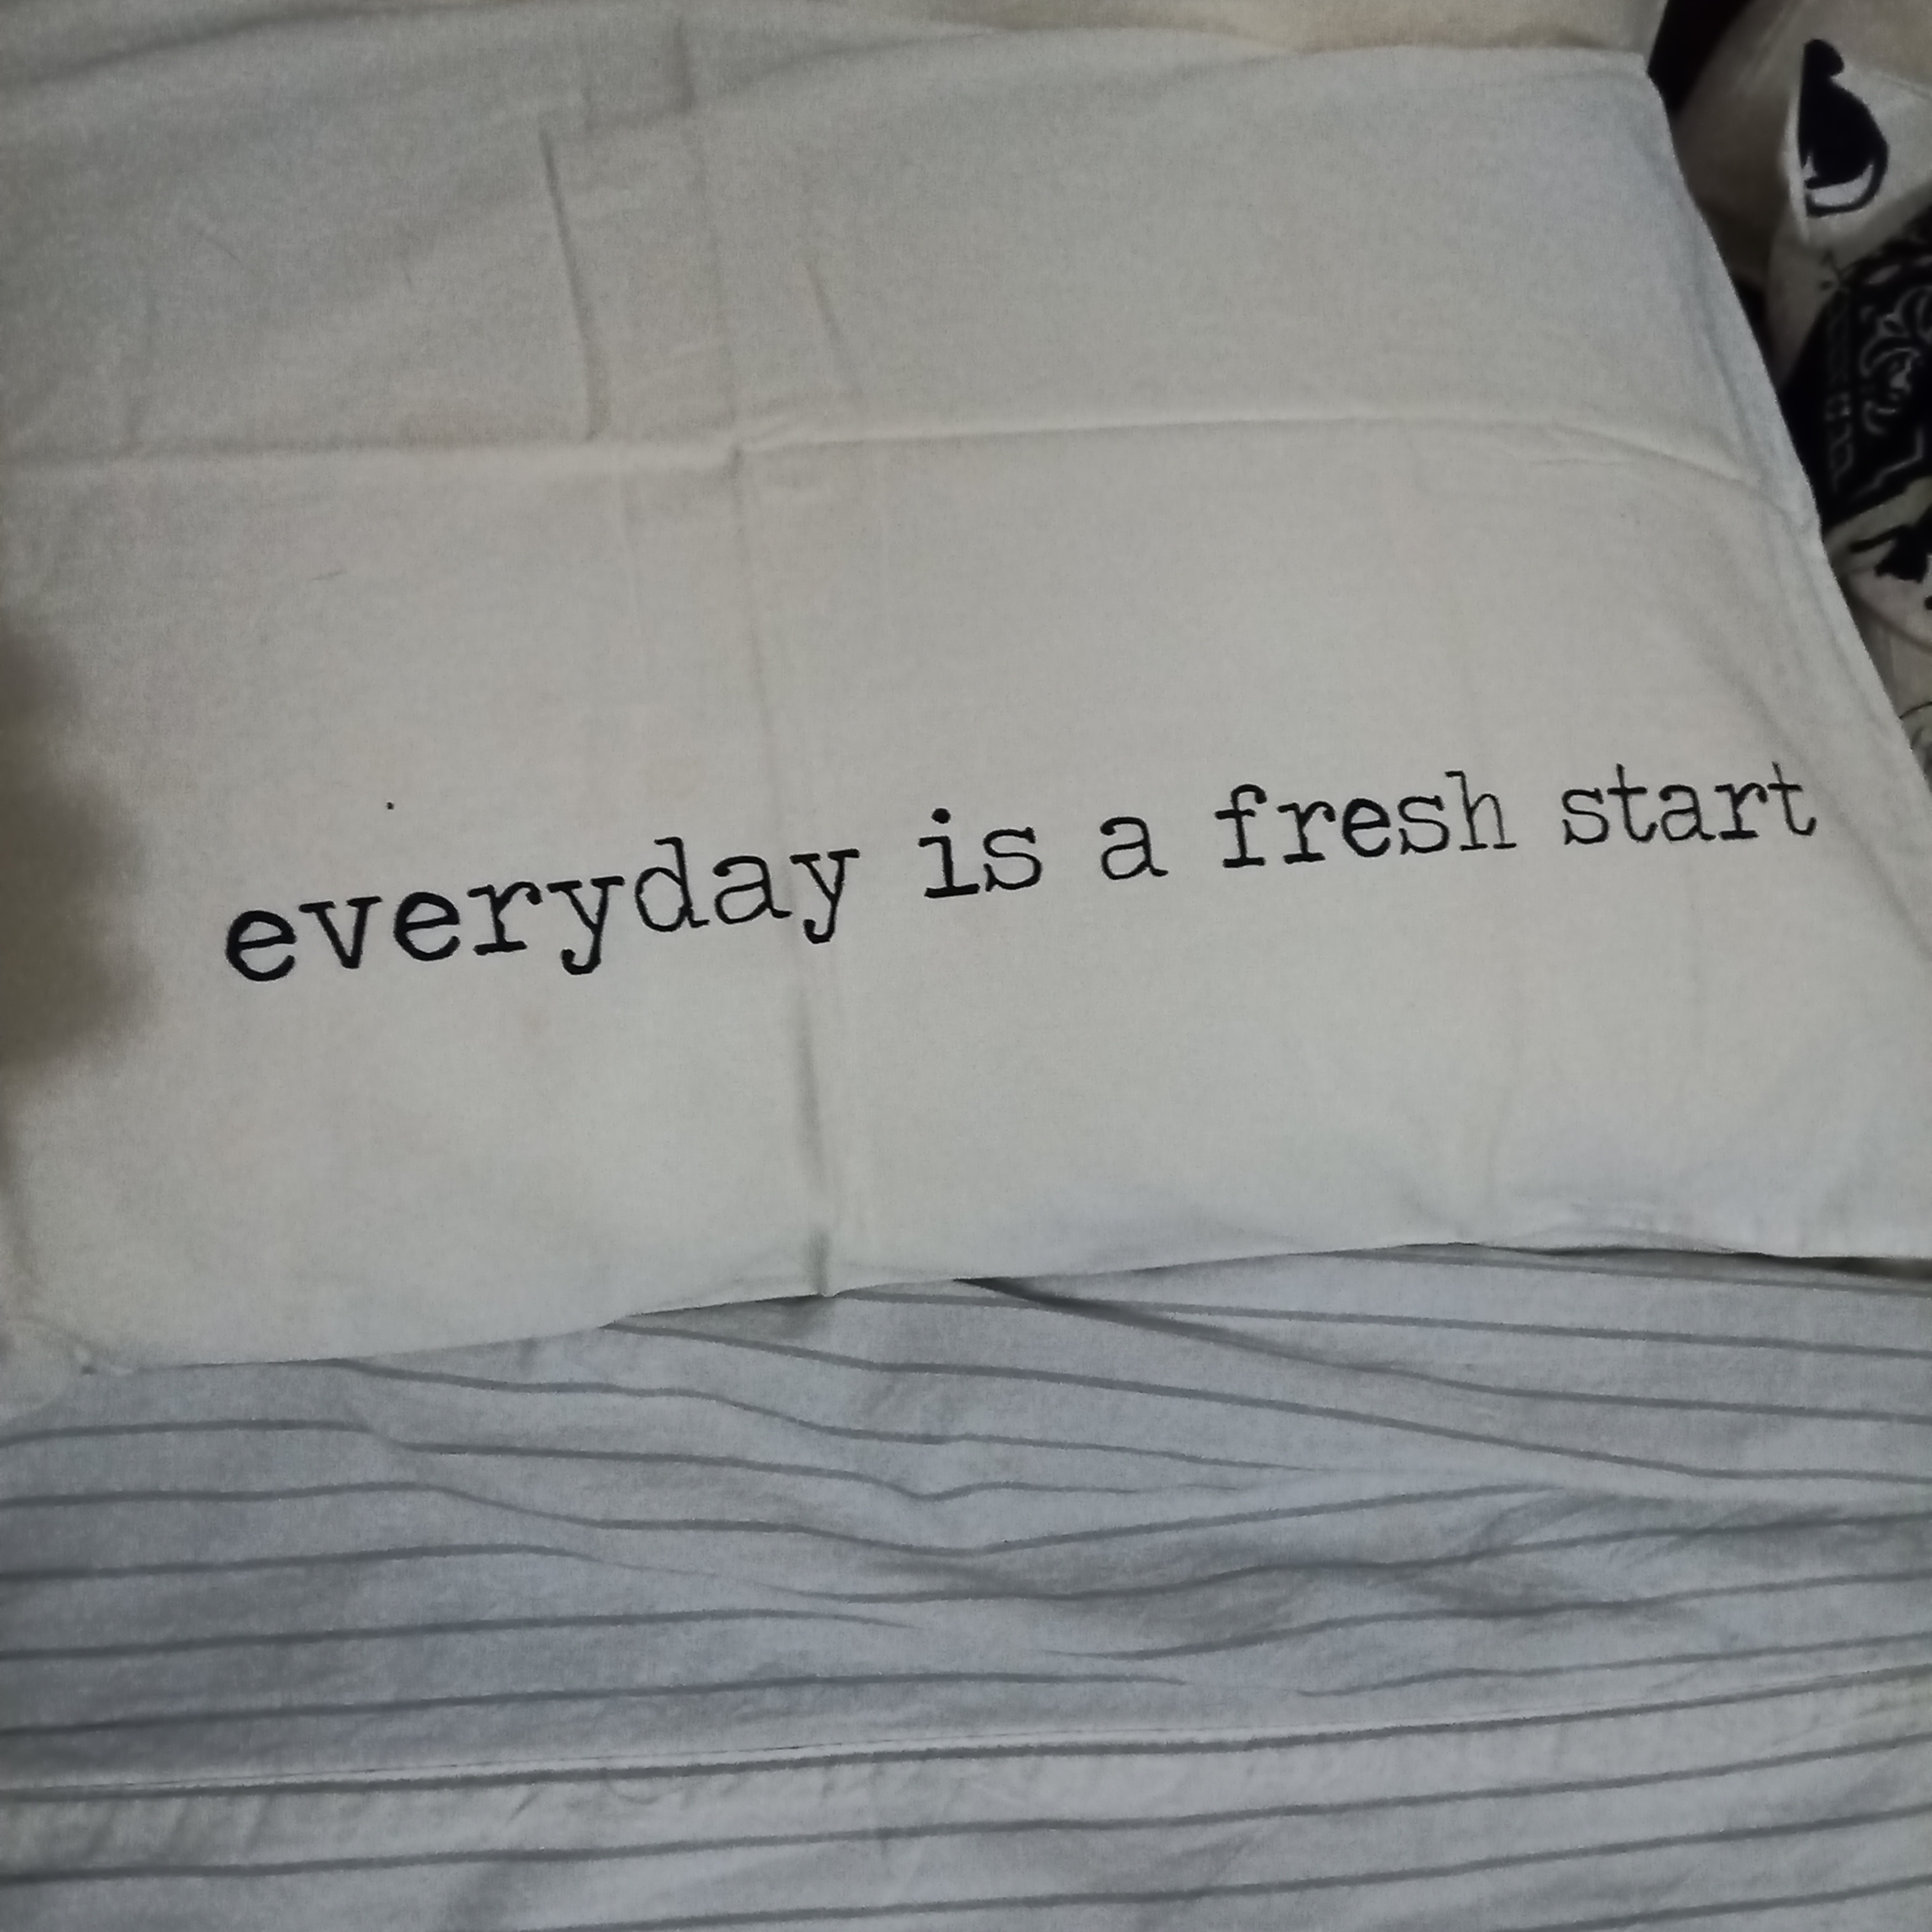 A white pillowcase with the black text "everyday is a fresh start" printed across it.